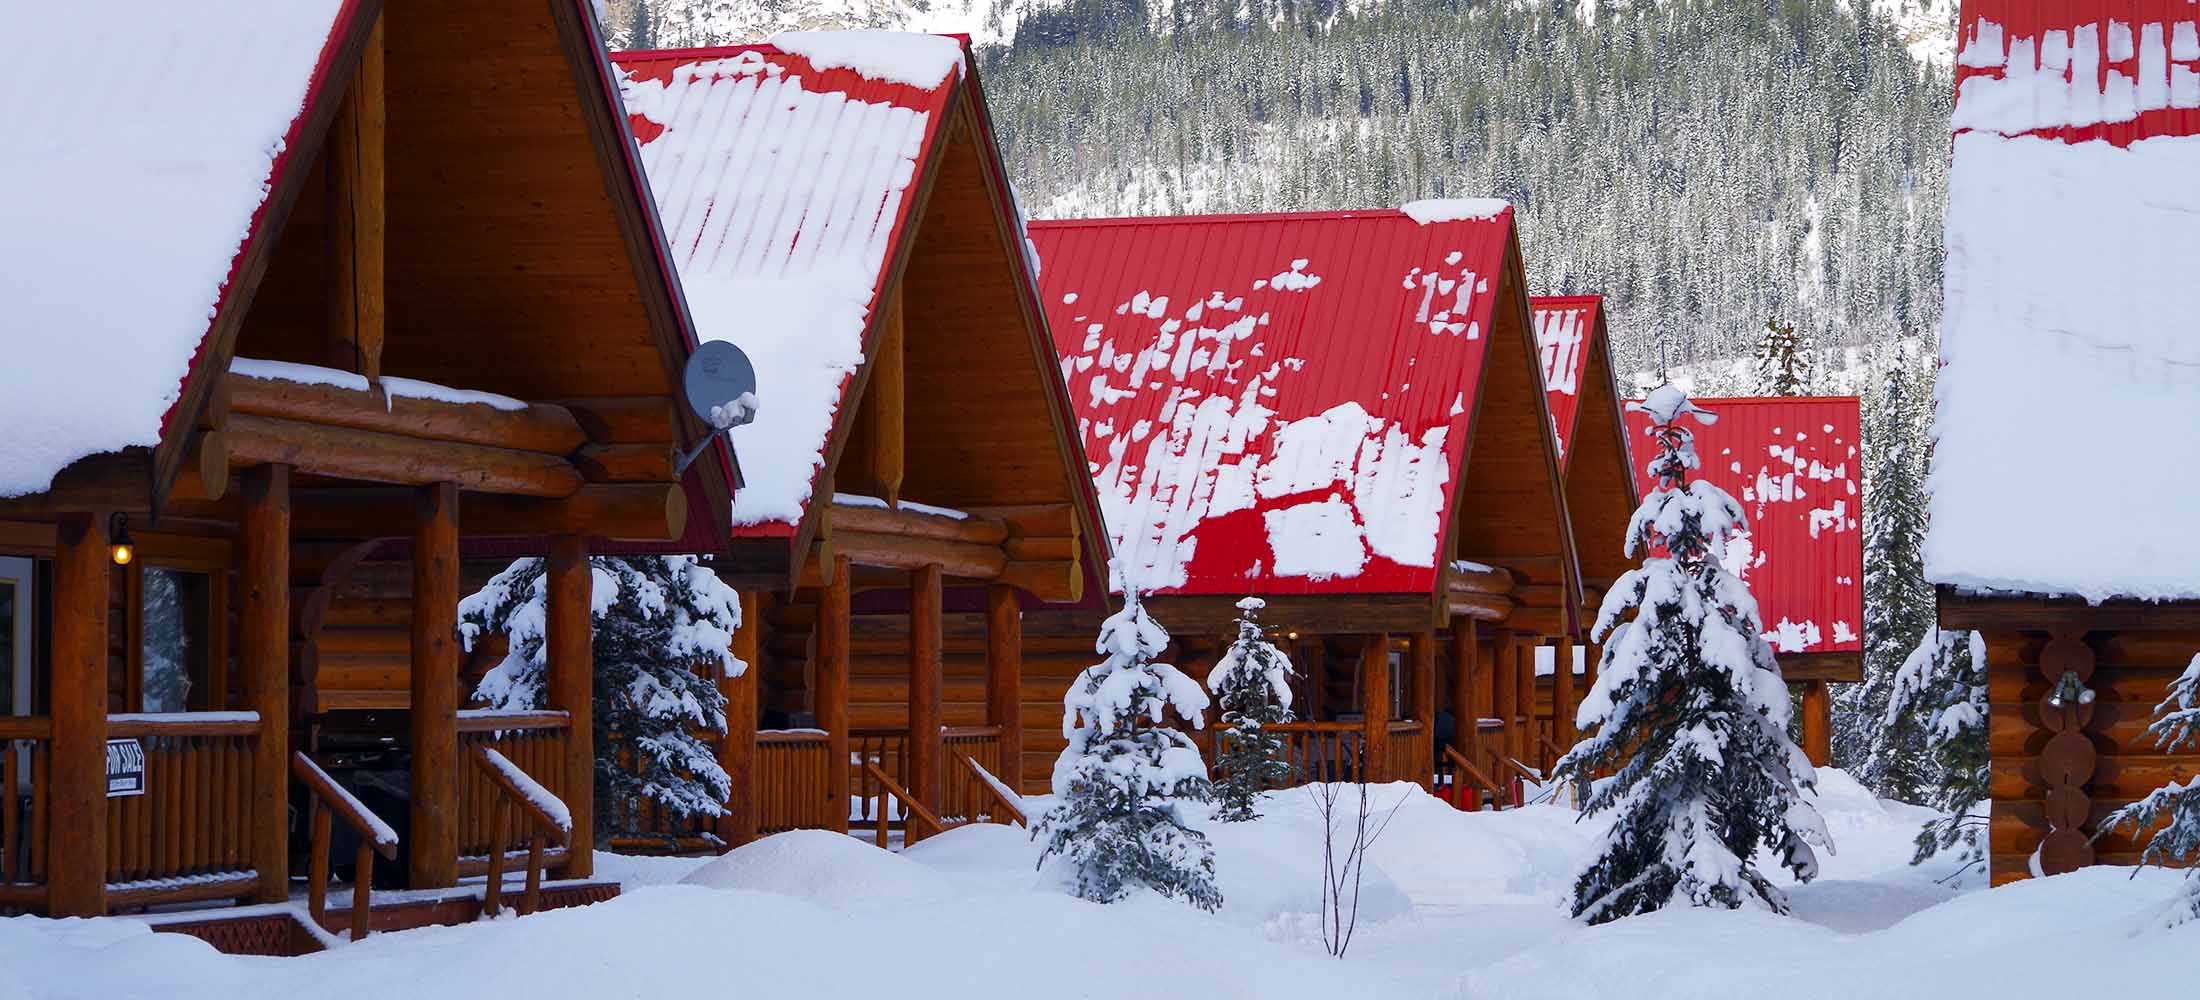 The Cabins at Kicking Horse River Chalets in Golden British Columbia in winter